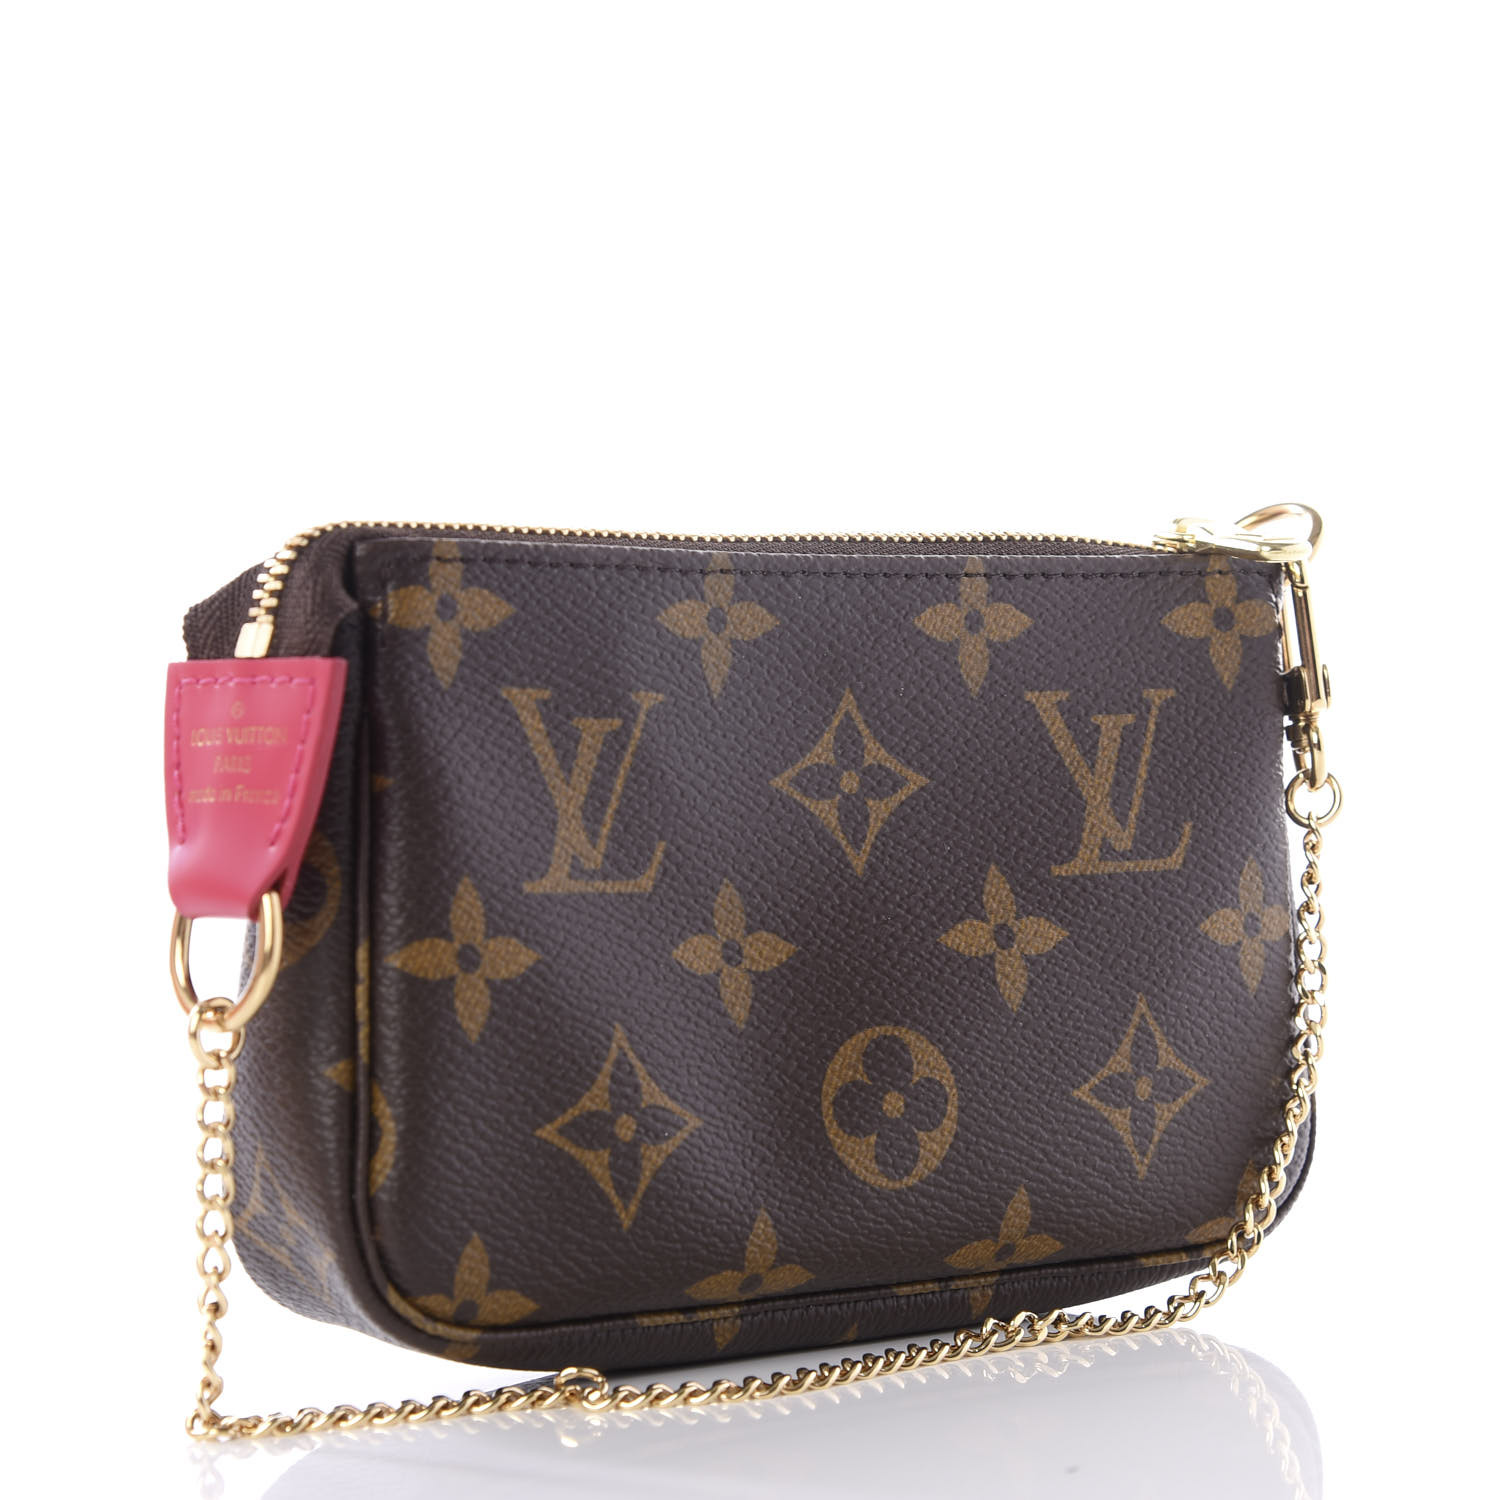 New Lv Purse 2020  Natural Resource Department